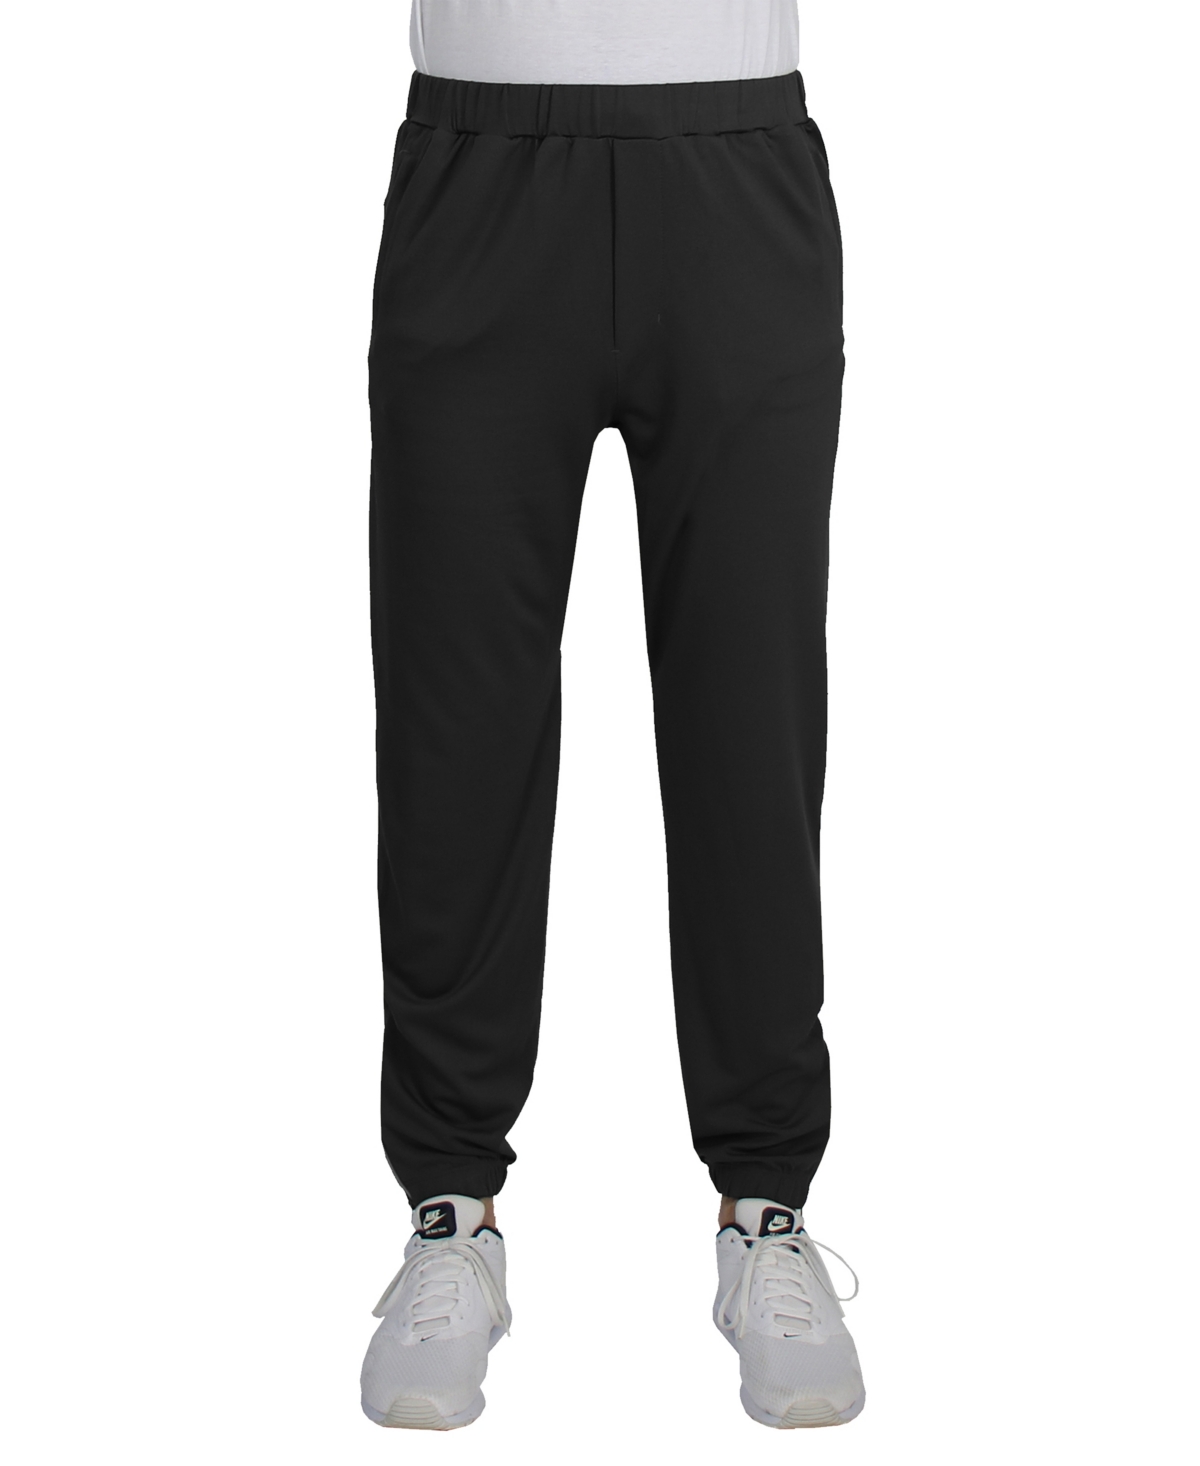 Blue Ice Men's Moisture Wicking Performance Joggers With Reflective Trim Ankle Zippers In Black